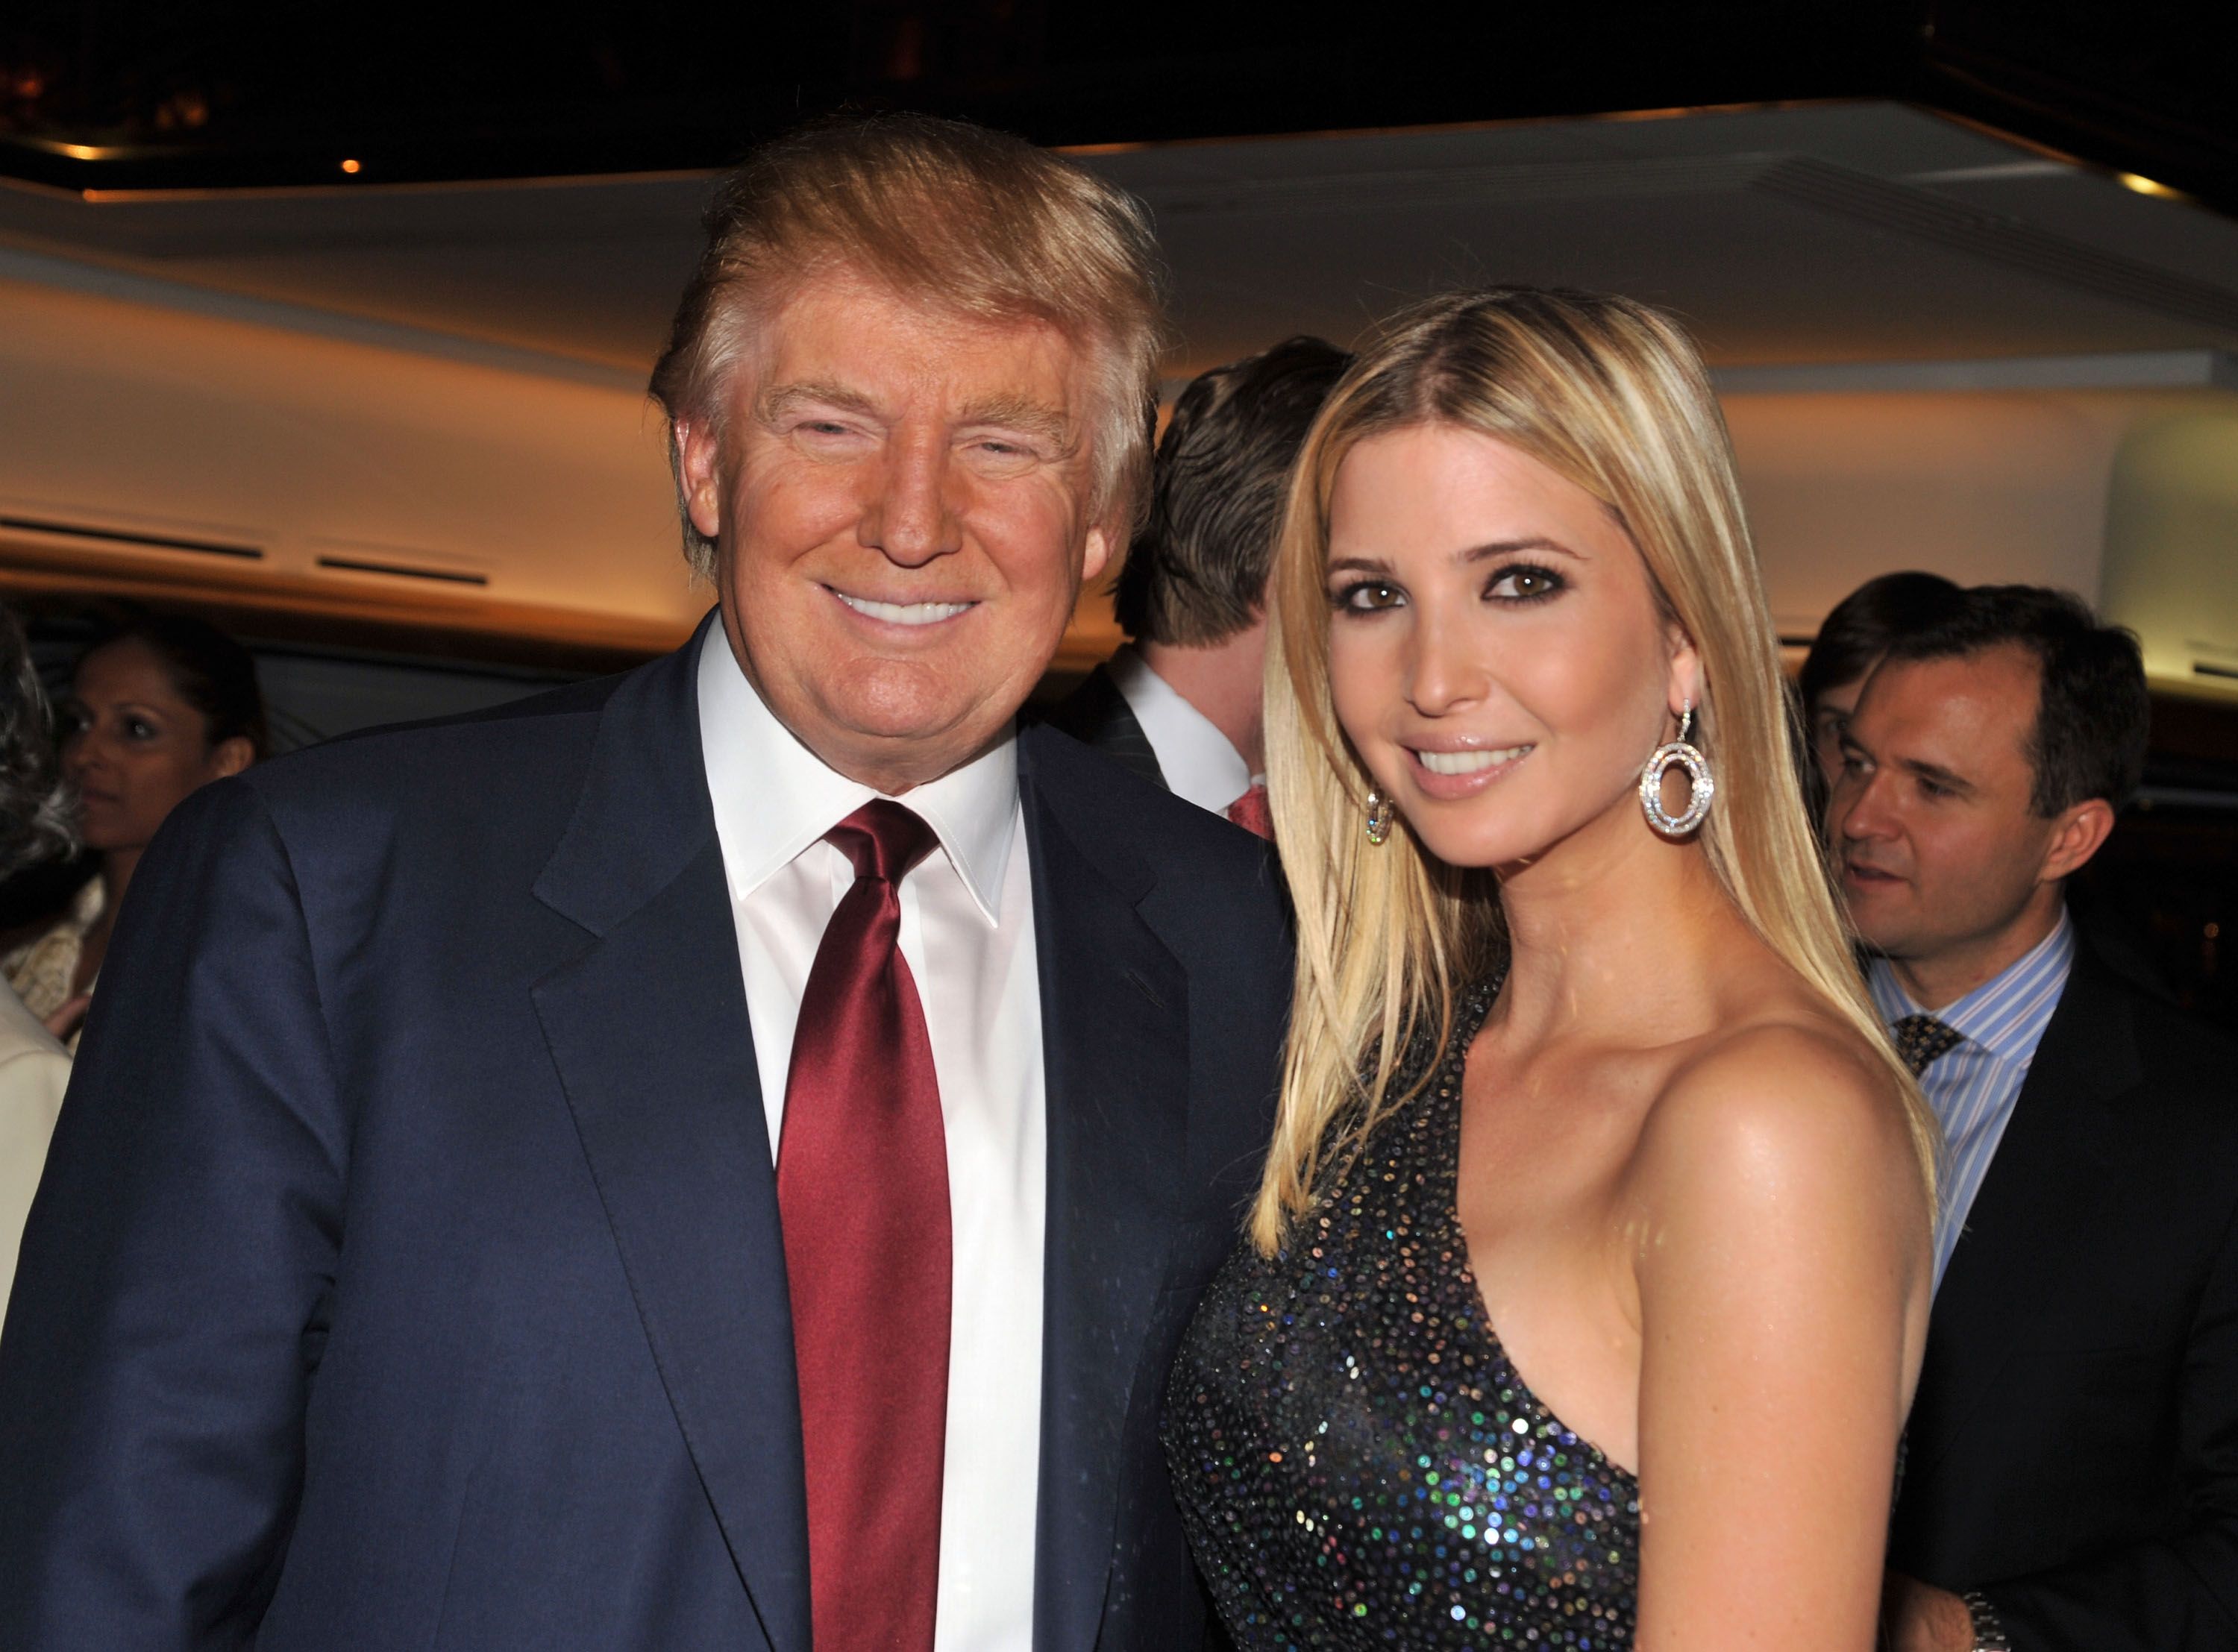 Donald Trump and Ivanka Trump attend the "The Trump Card: Playing to Win in Work and Life" book launch celebration at Trump Tower | Photo: Getty Images